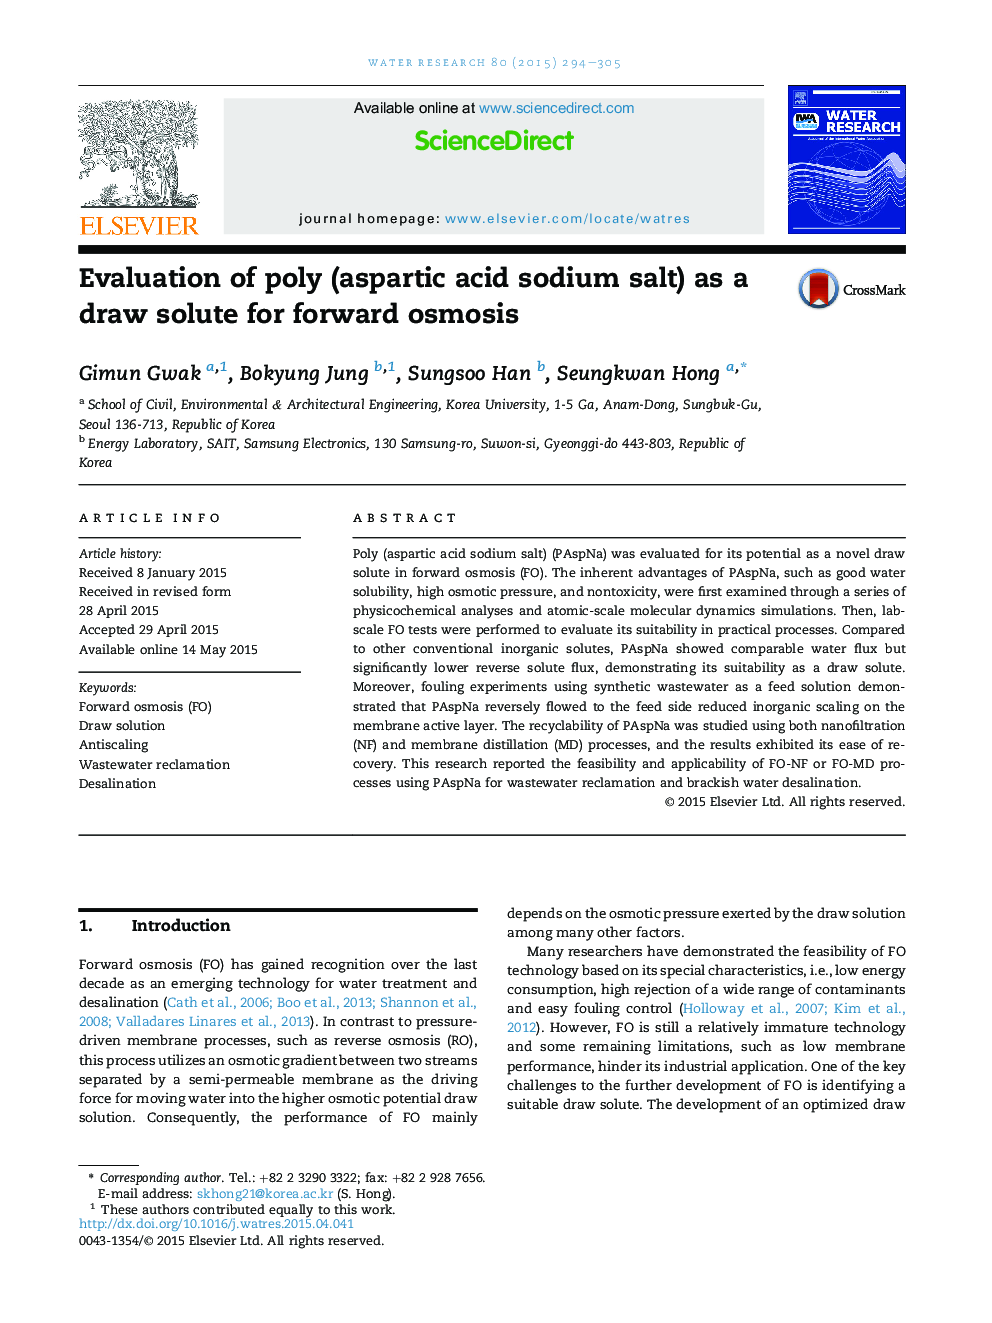 Evaluation of poly (aspartic acid sodium salt) as a draw solute for forward osmosis